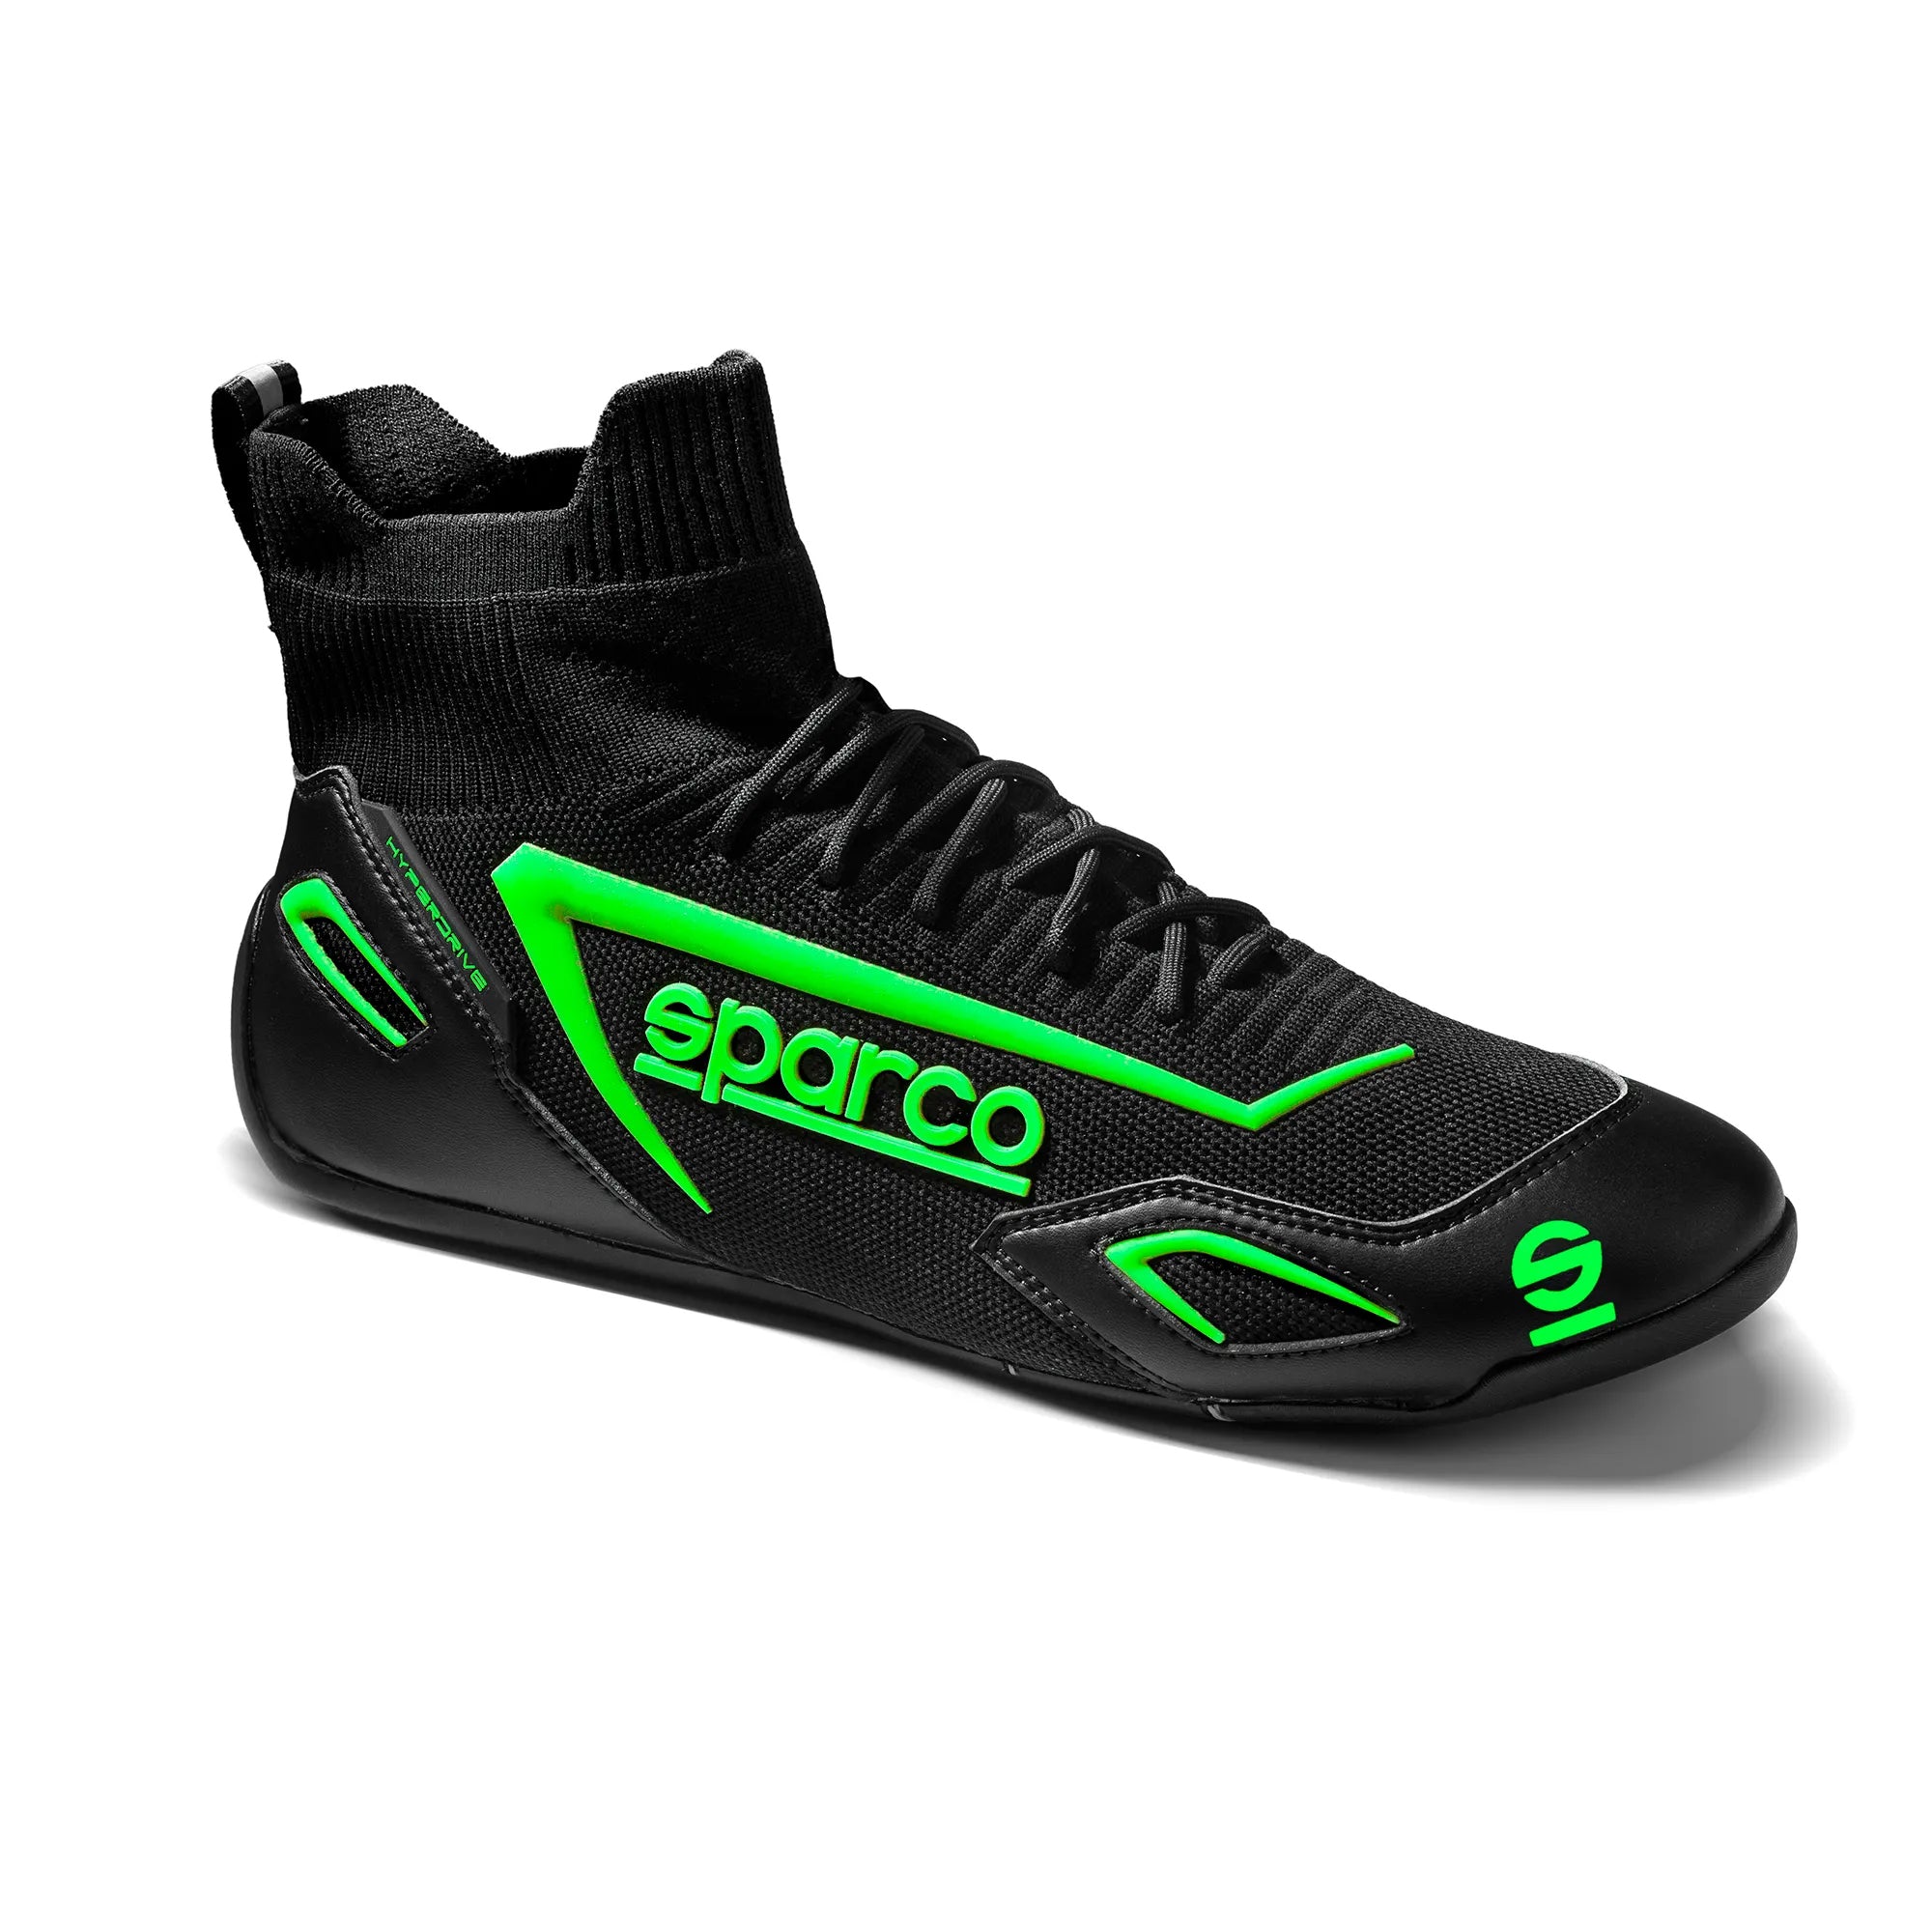 SPARCO 00129345NRVF Gaming sim racing shoes HYPERDRIVE, black/green, size 45 Photo-1 